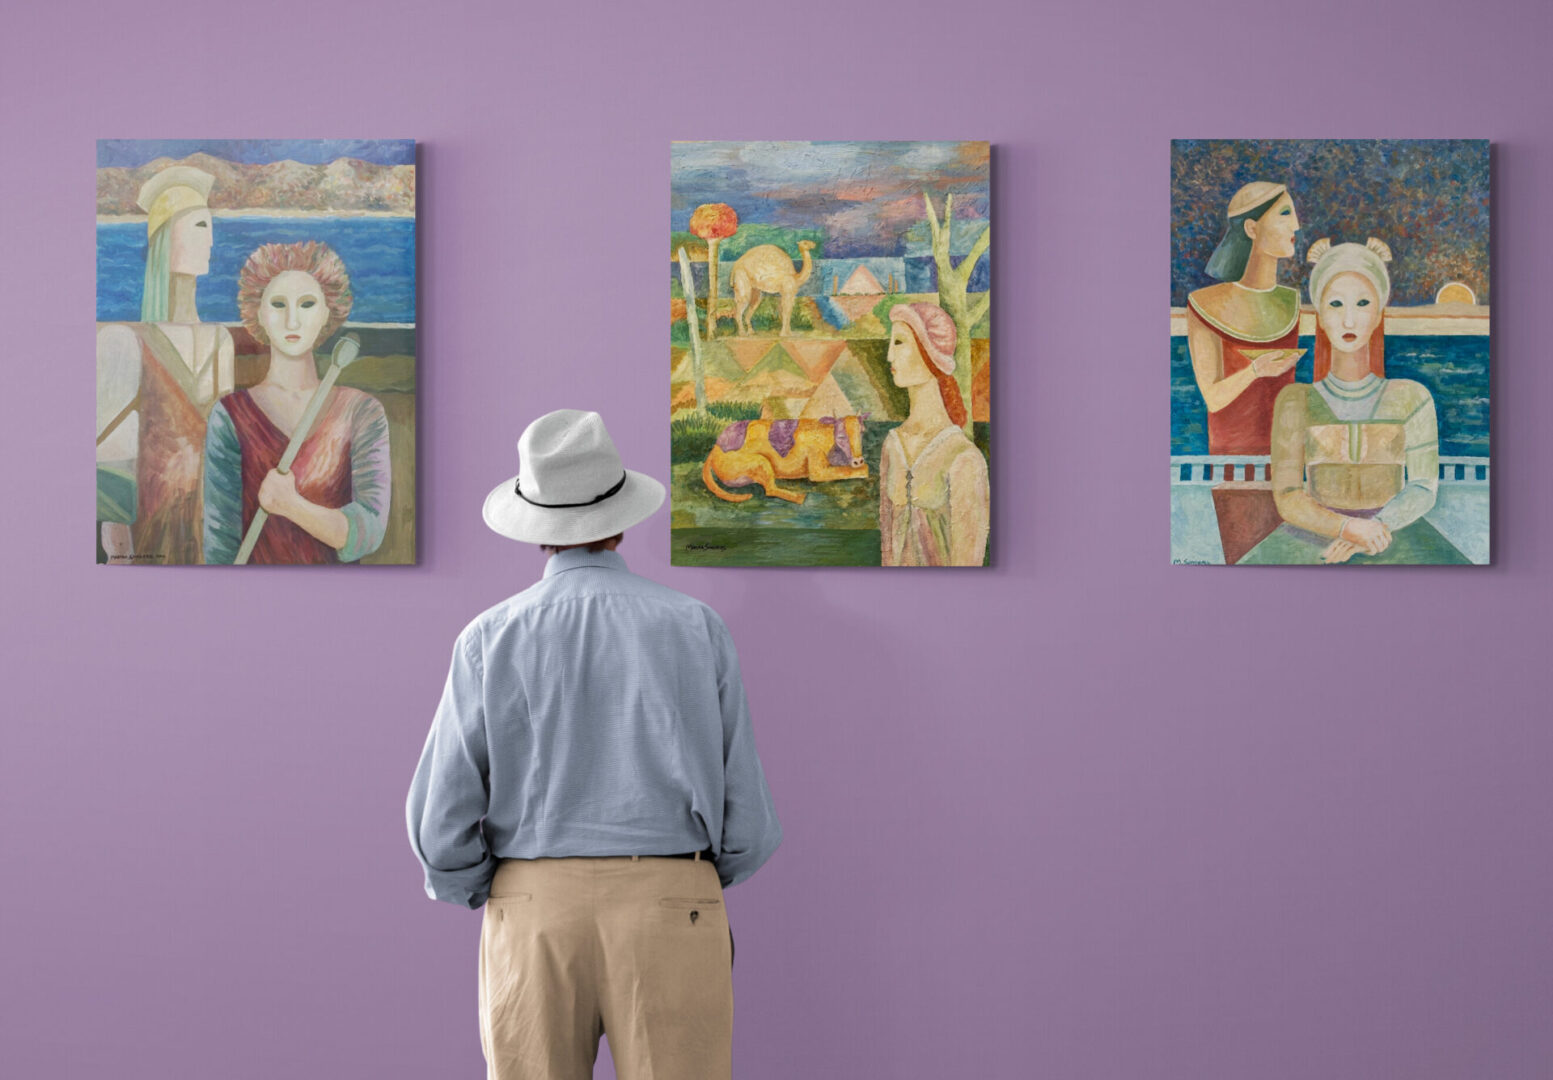 A man admiring local fine art for sale displayed on a vibrant purple wall.